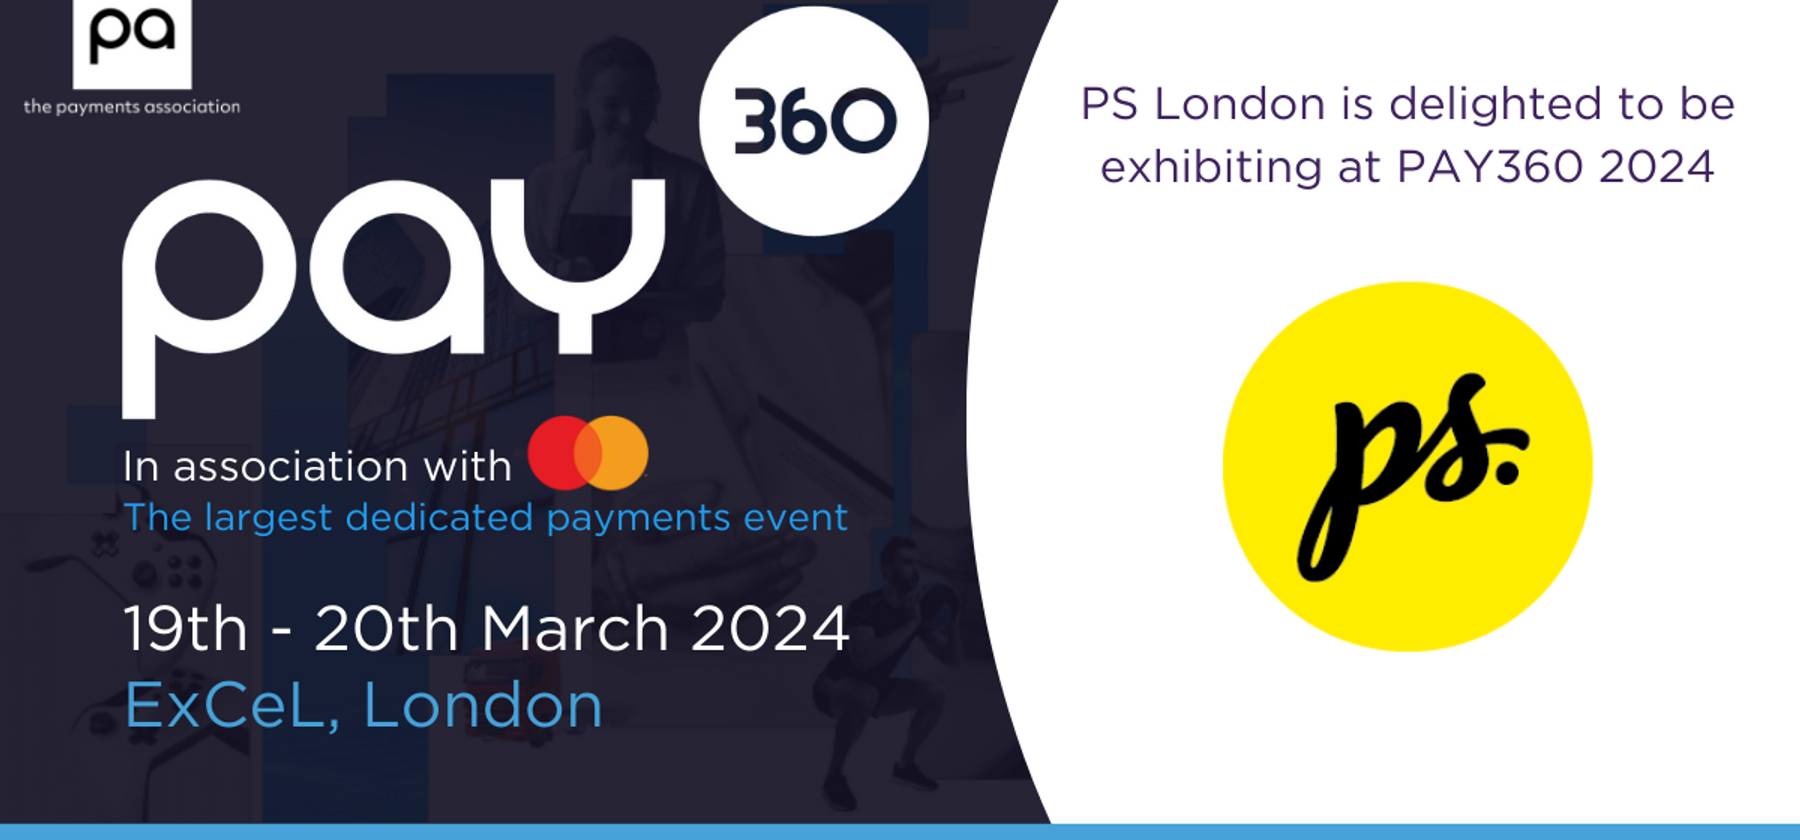 psLondon is exhibiting at PAY360 event | 19th - 20th March 2024 | Stand 68